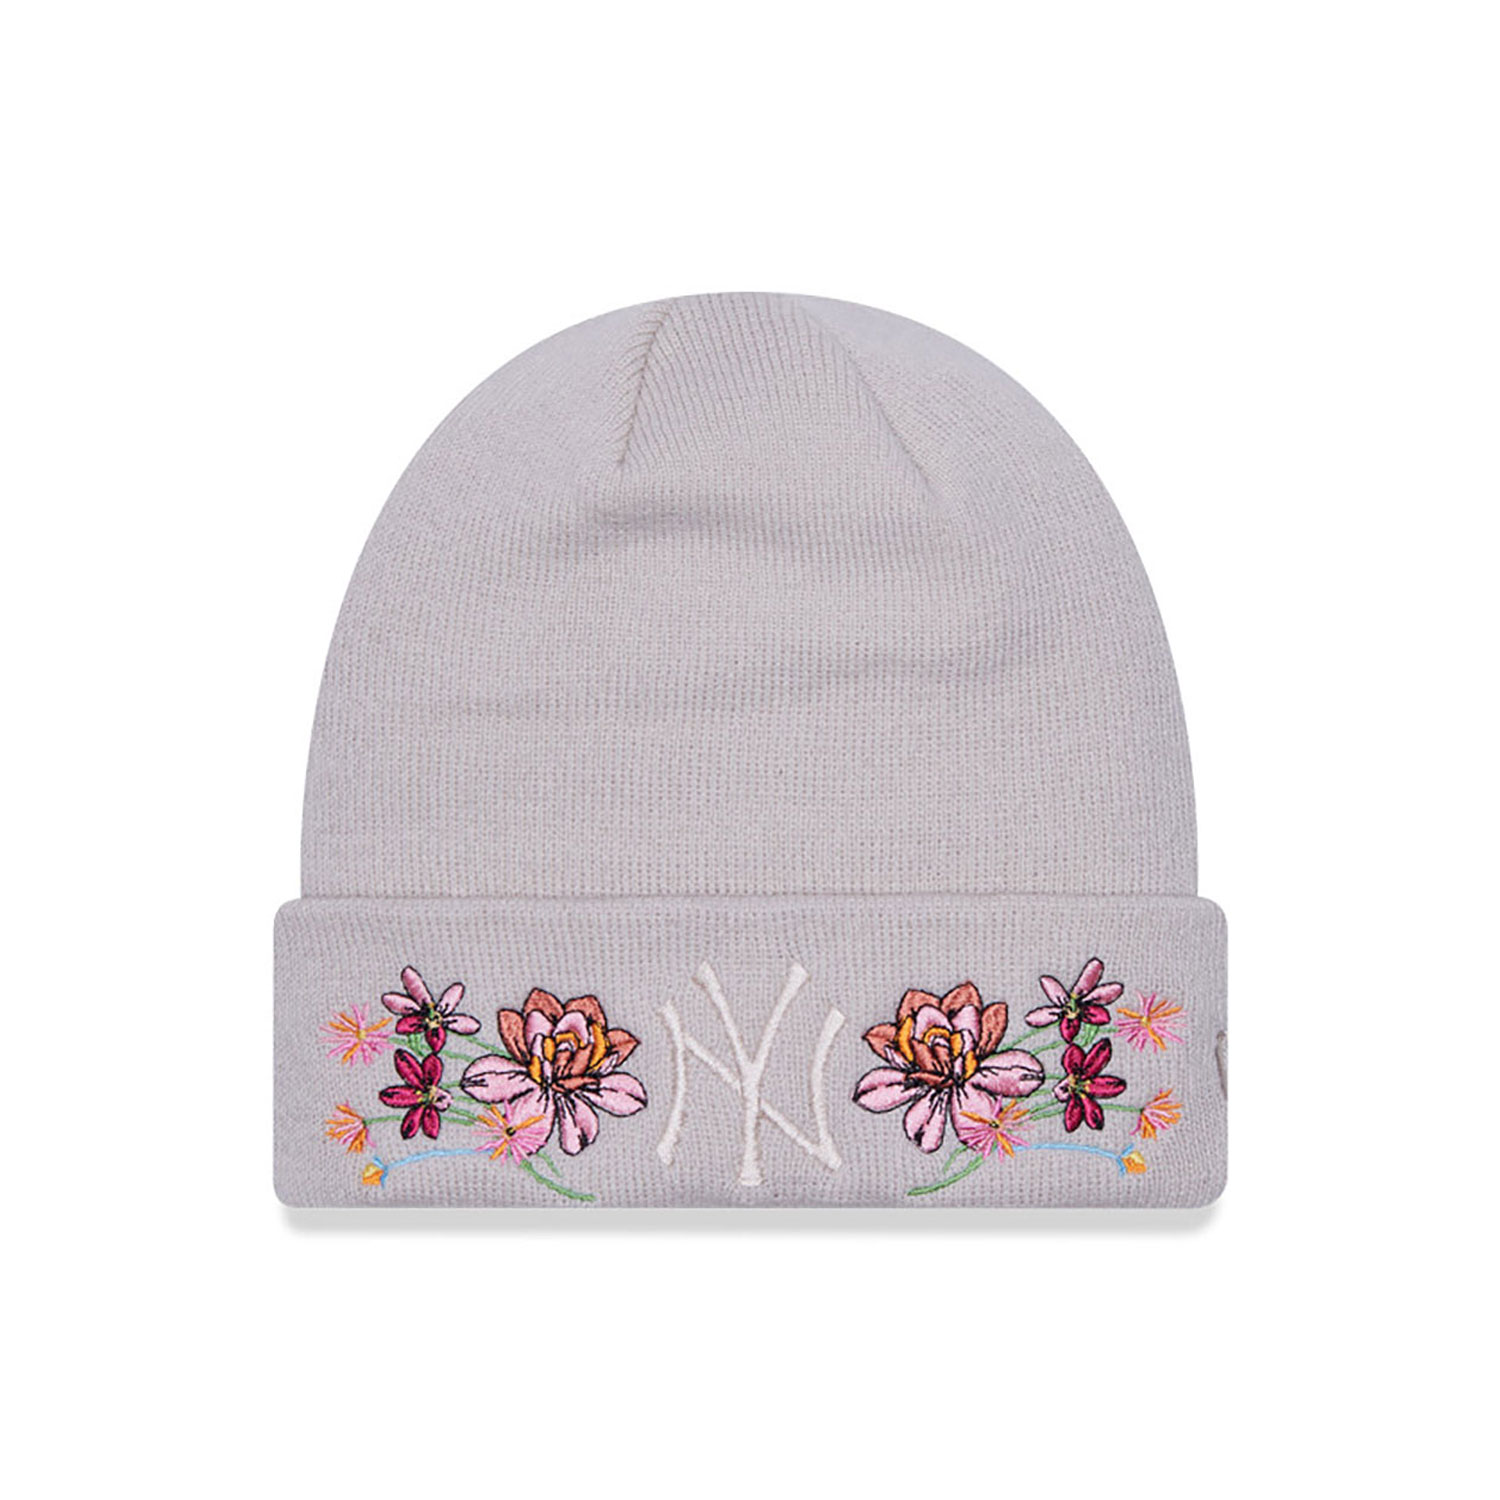 New York Yankees Womens Floral Stone Cuff Knit Beanie Hat